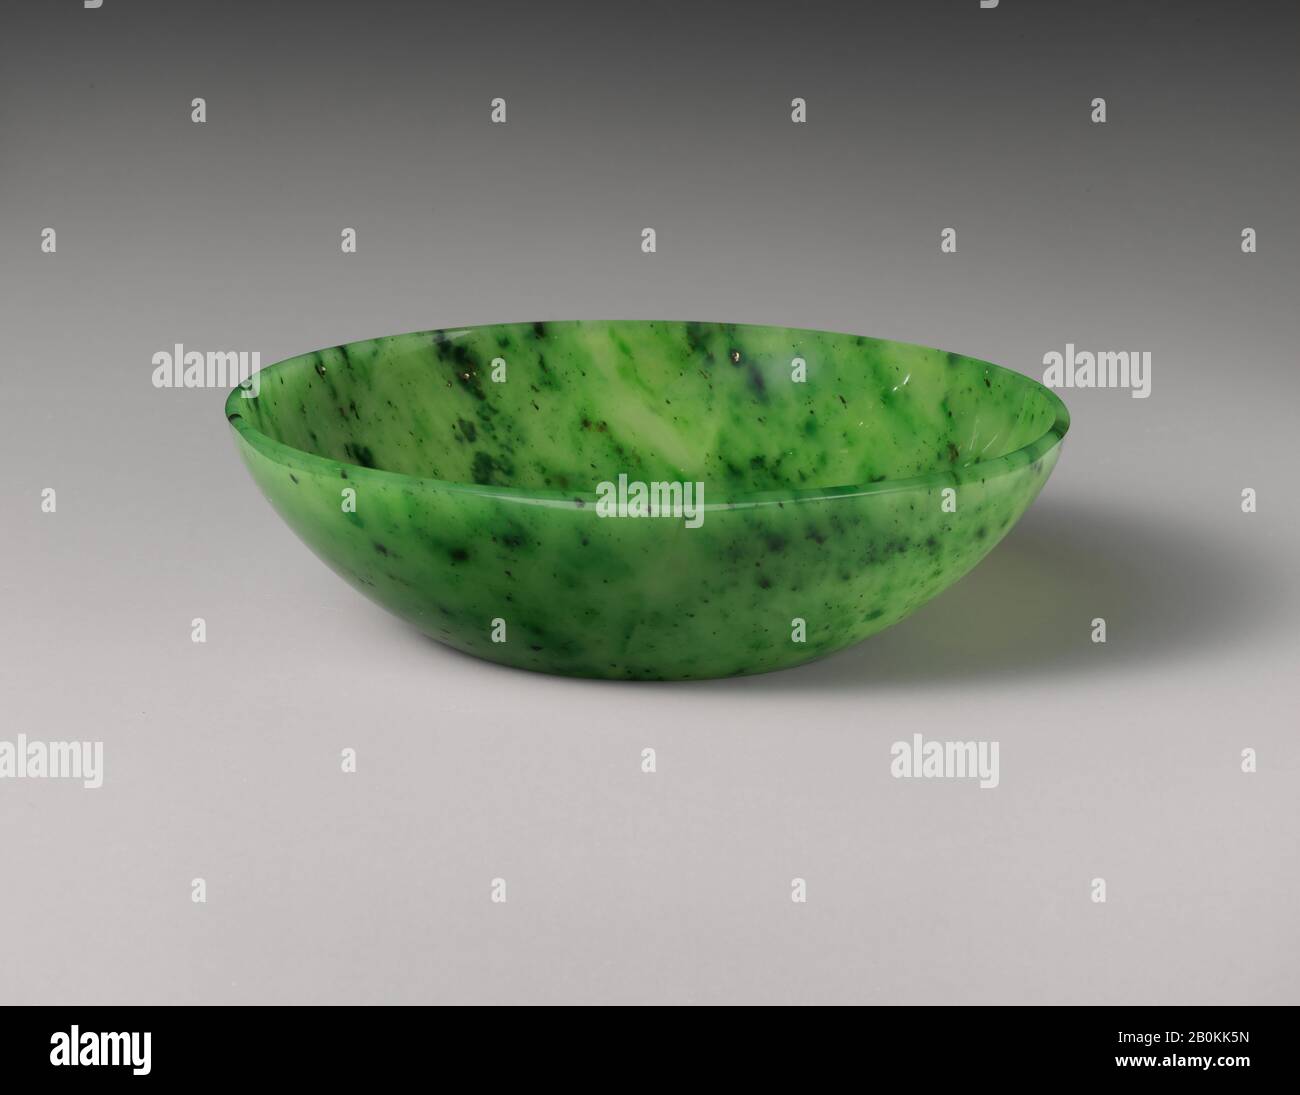 Bowl, Russia, 1883, Russia, Nephrite, variegated pear-leaf green with tiny specks of black, H. 1 5/16 in. (3.4 cm); W. 4 13/16 in. (12.2 cm), Jade Stock Photo